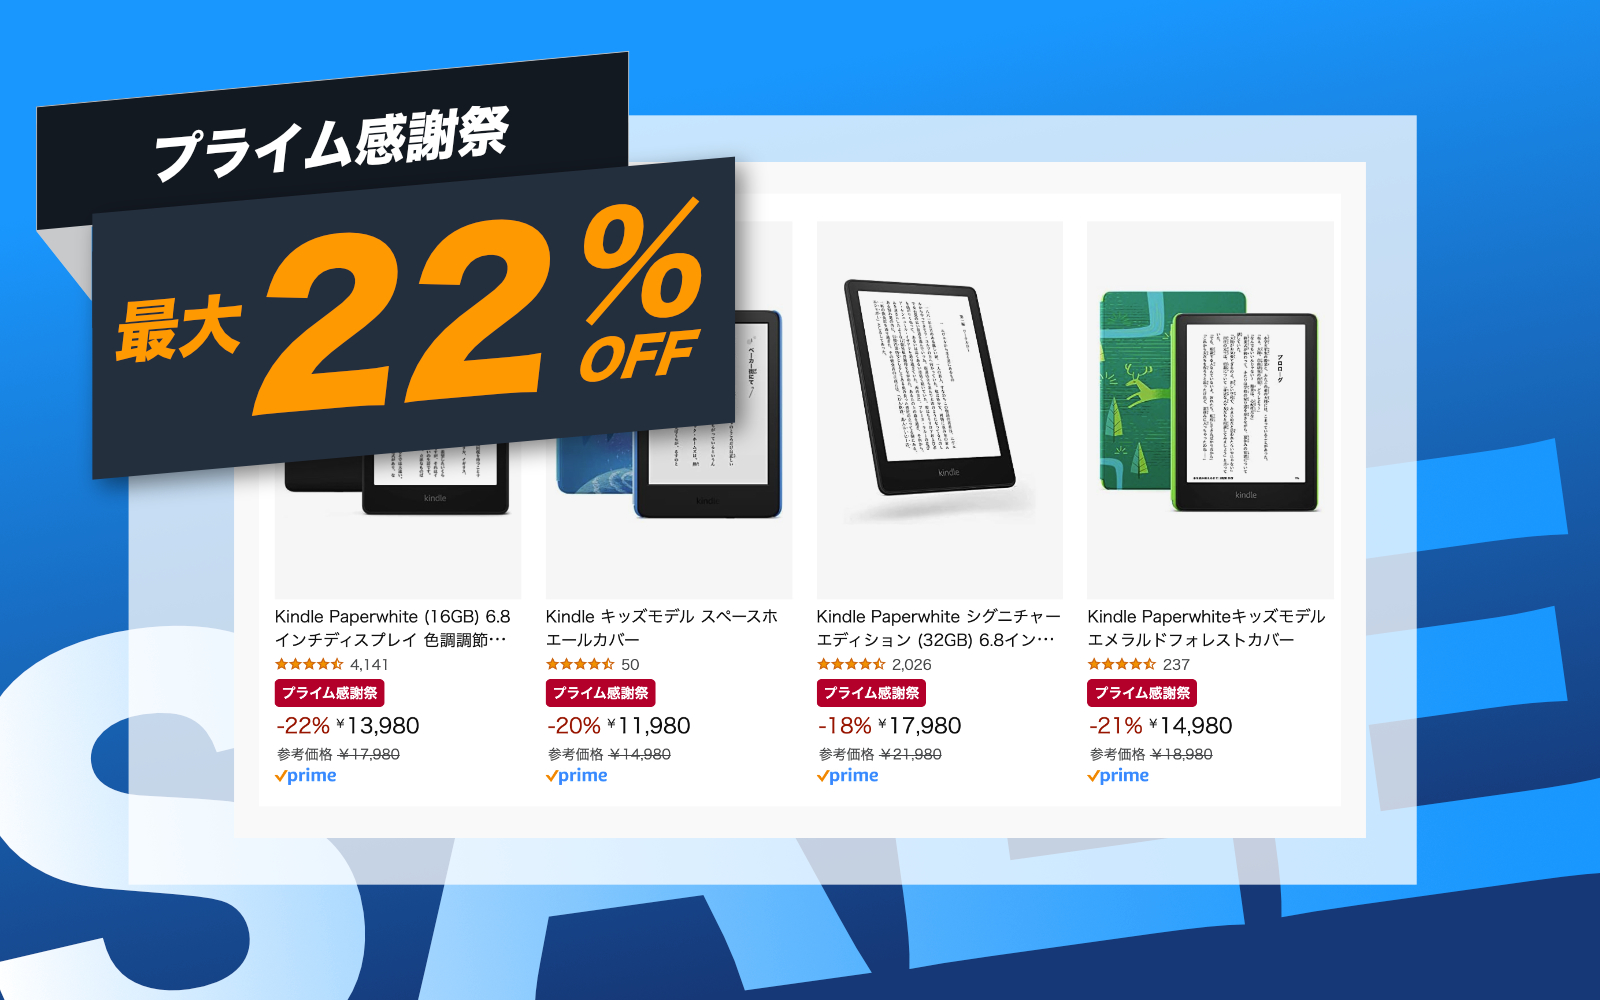 Kindle devices on sale